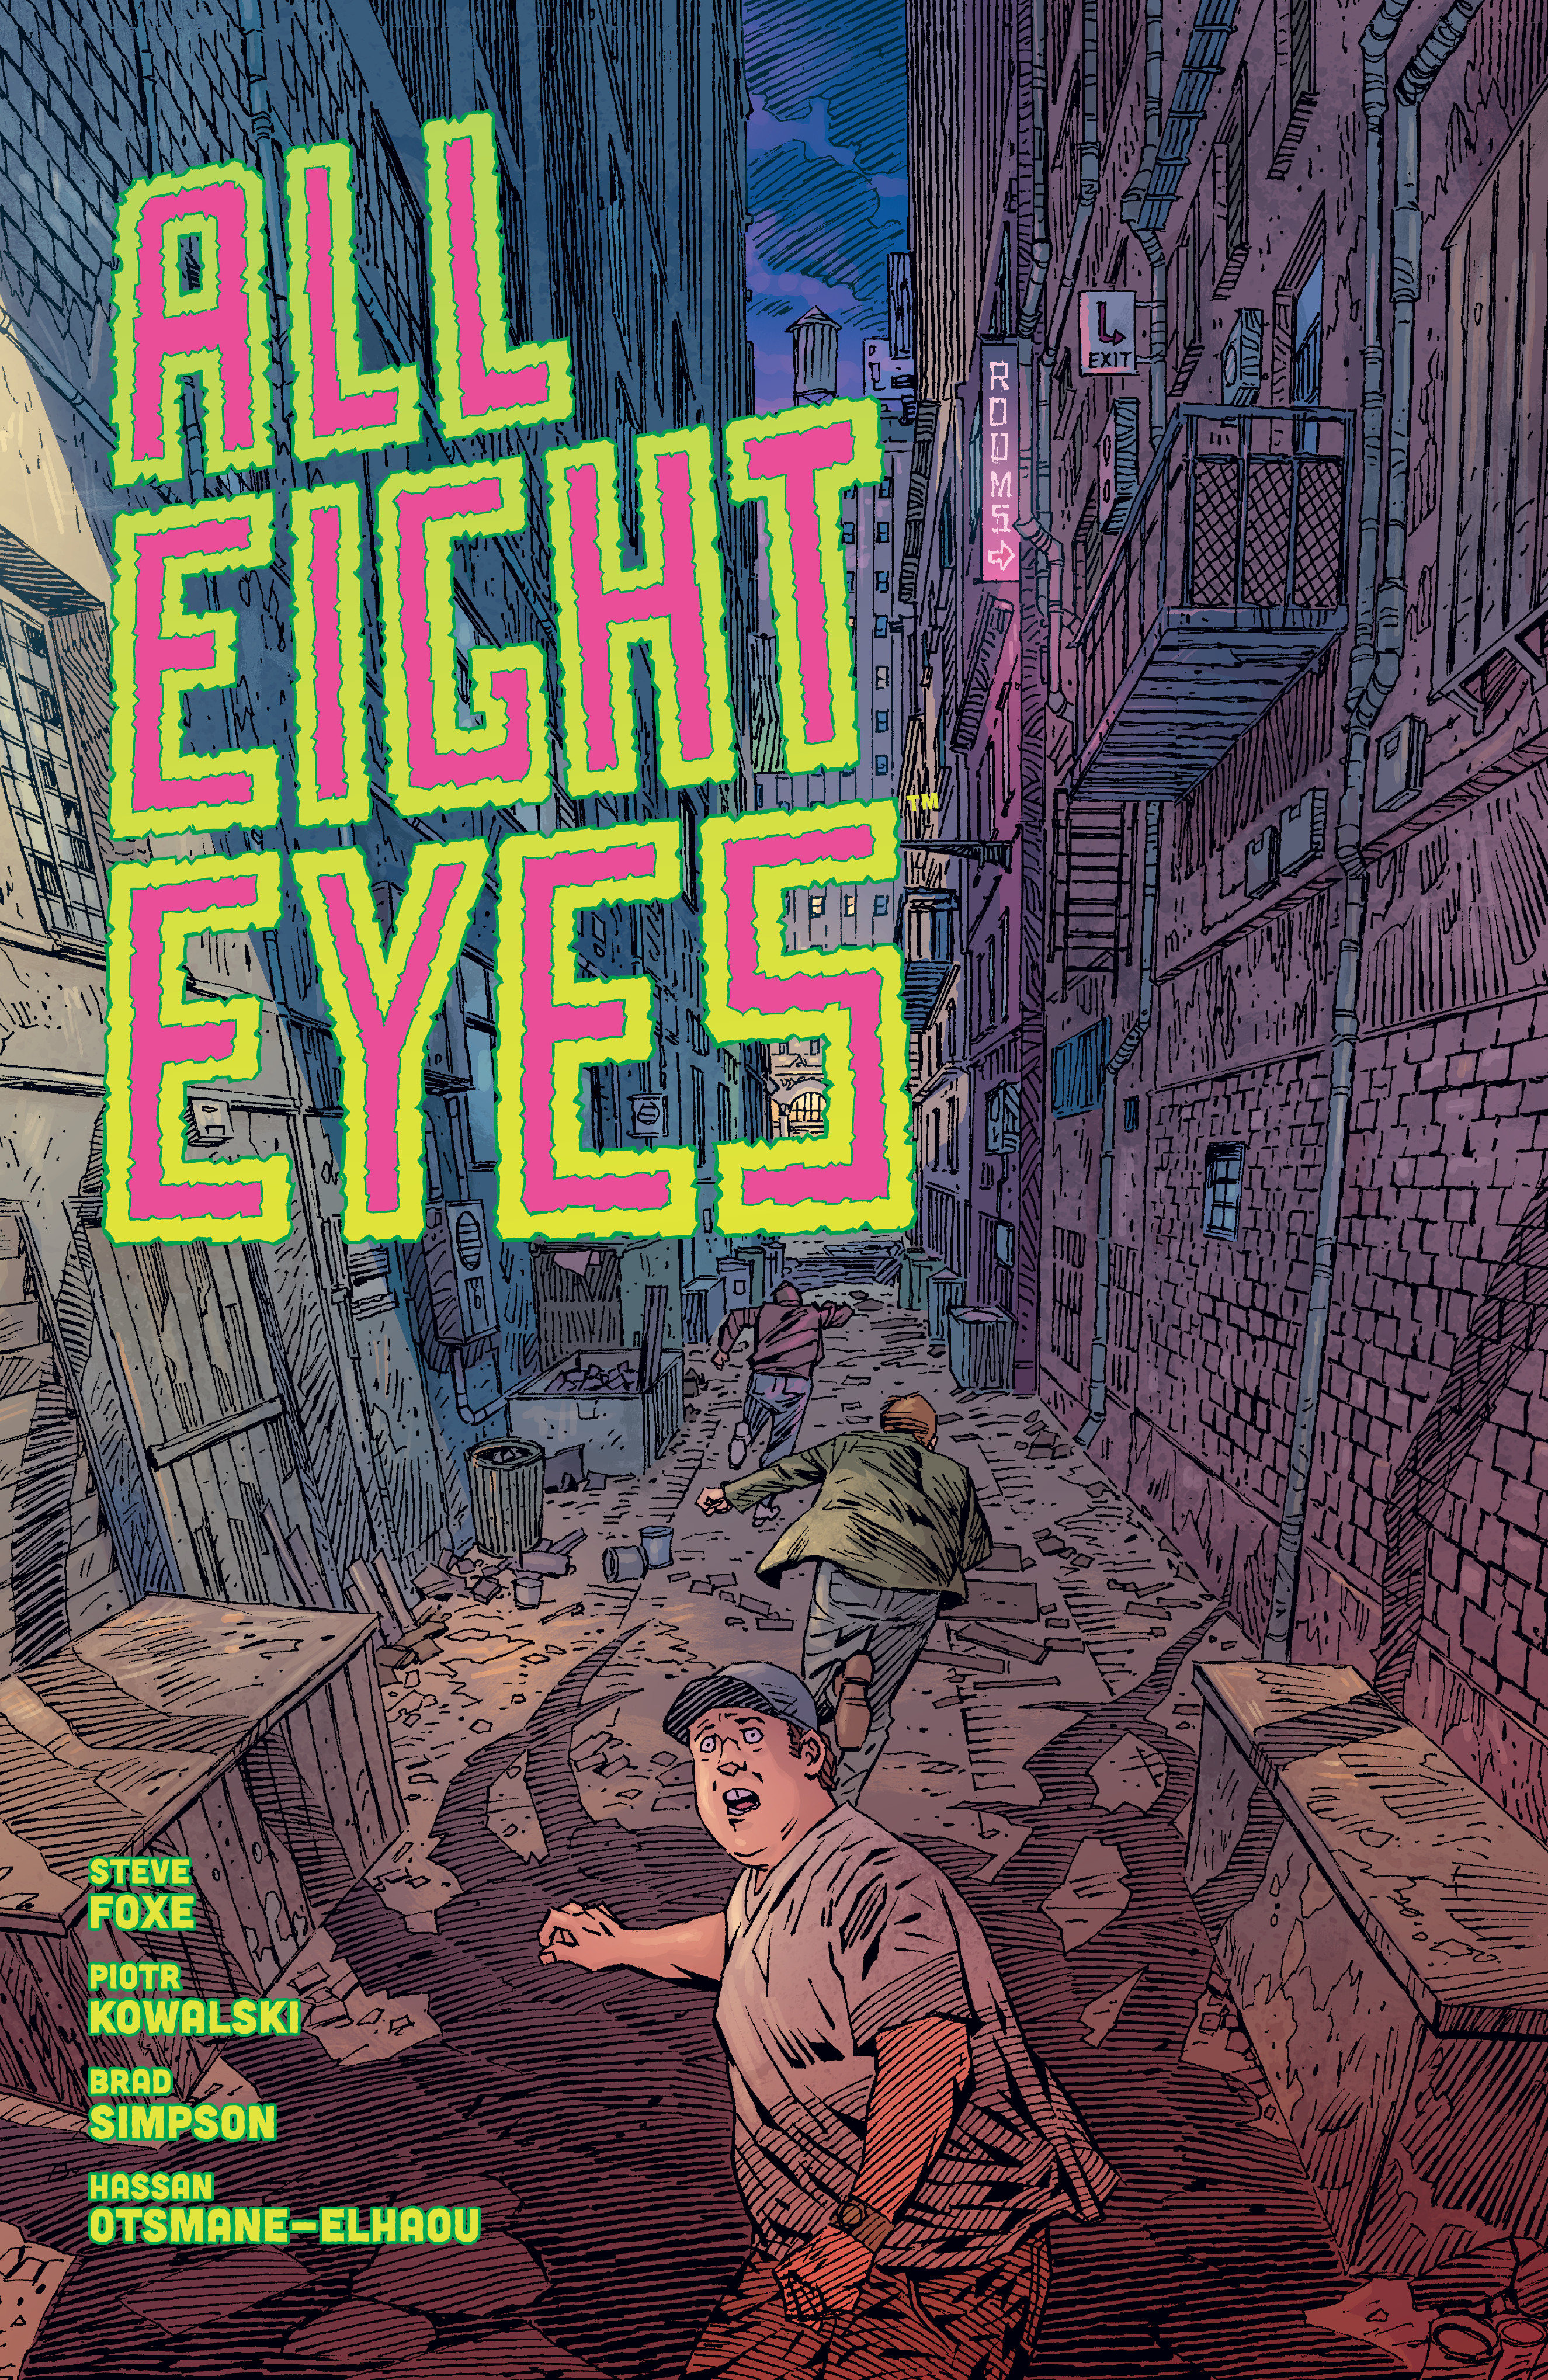 All Eight Eyes Graphic Novel